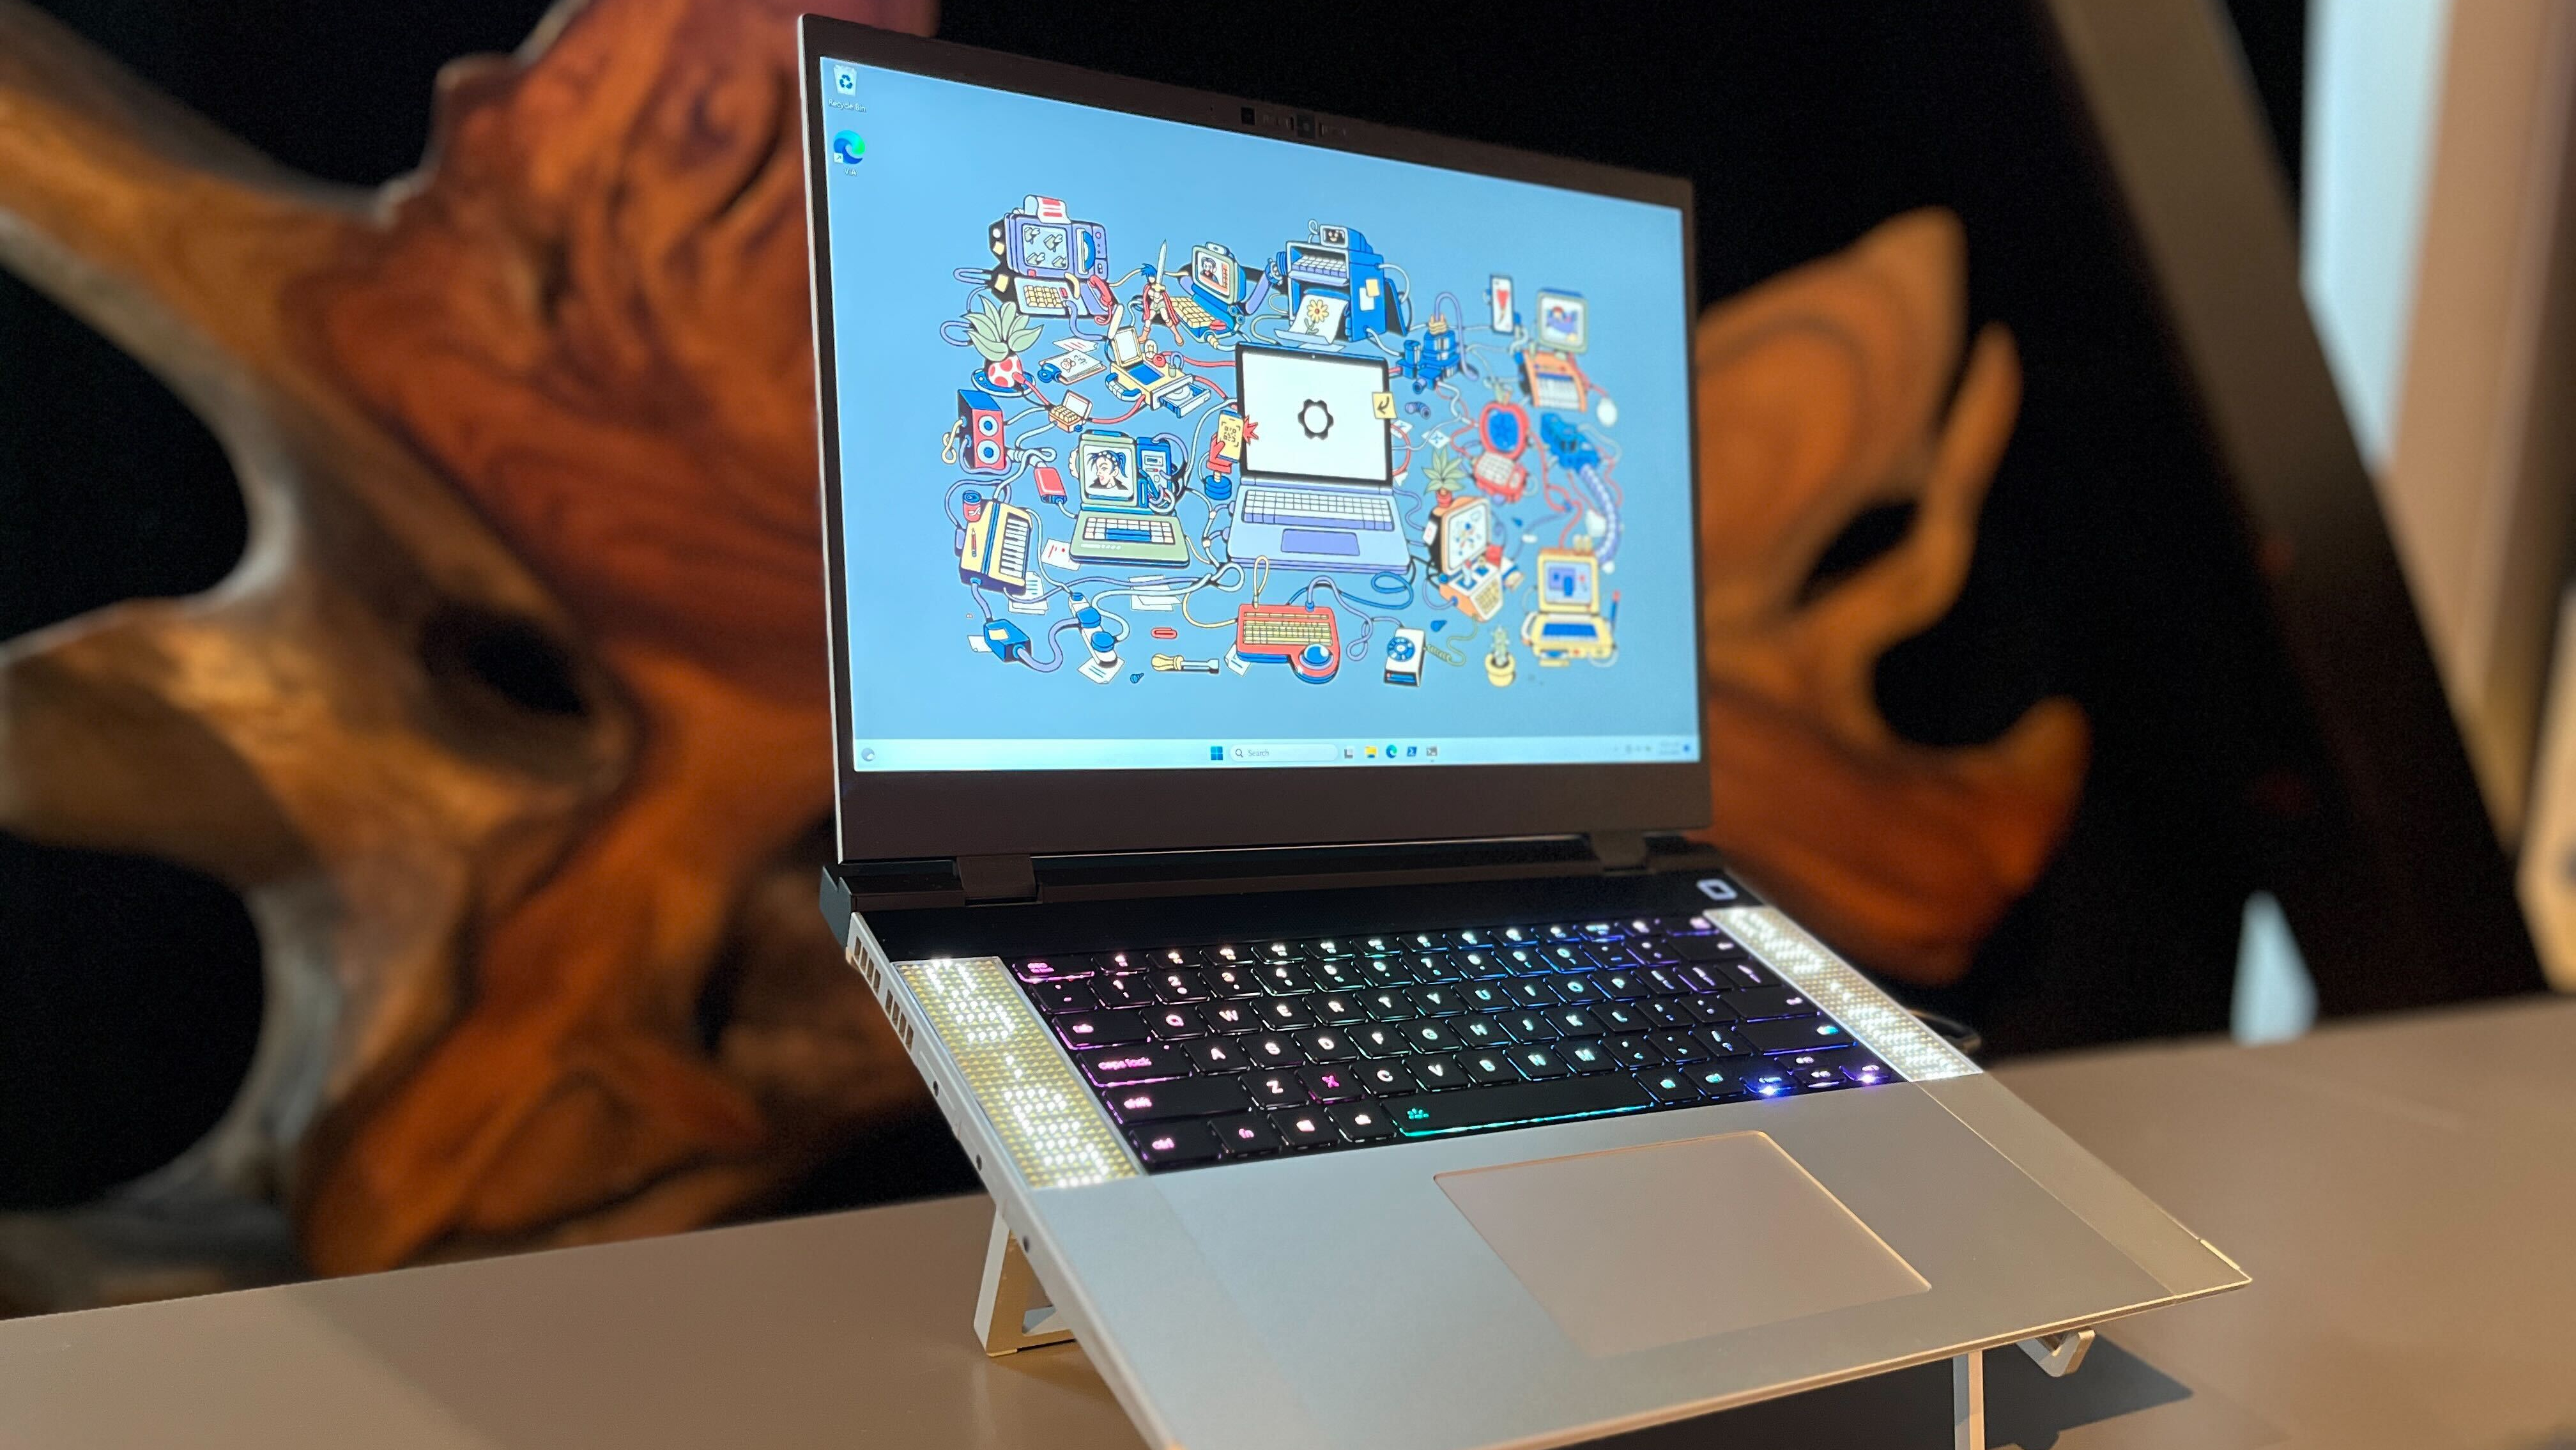 Framework Laptop 13 Review (2023): The Repairable Laptop Gets Even